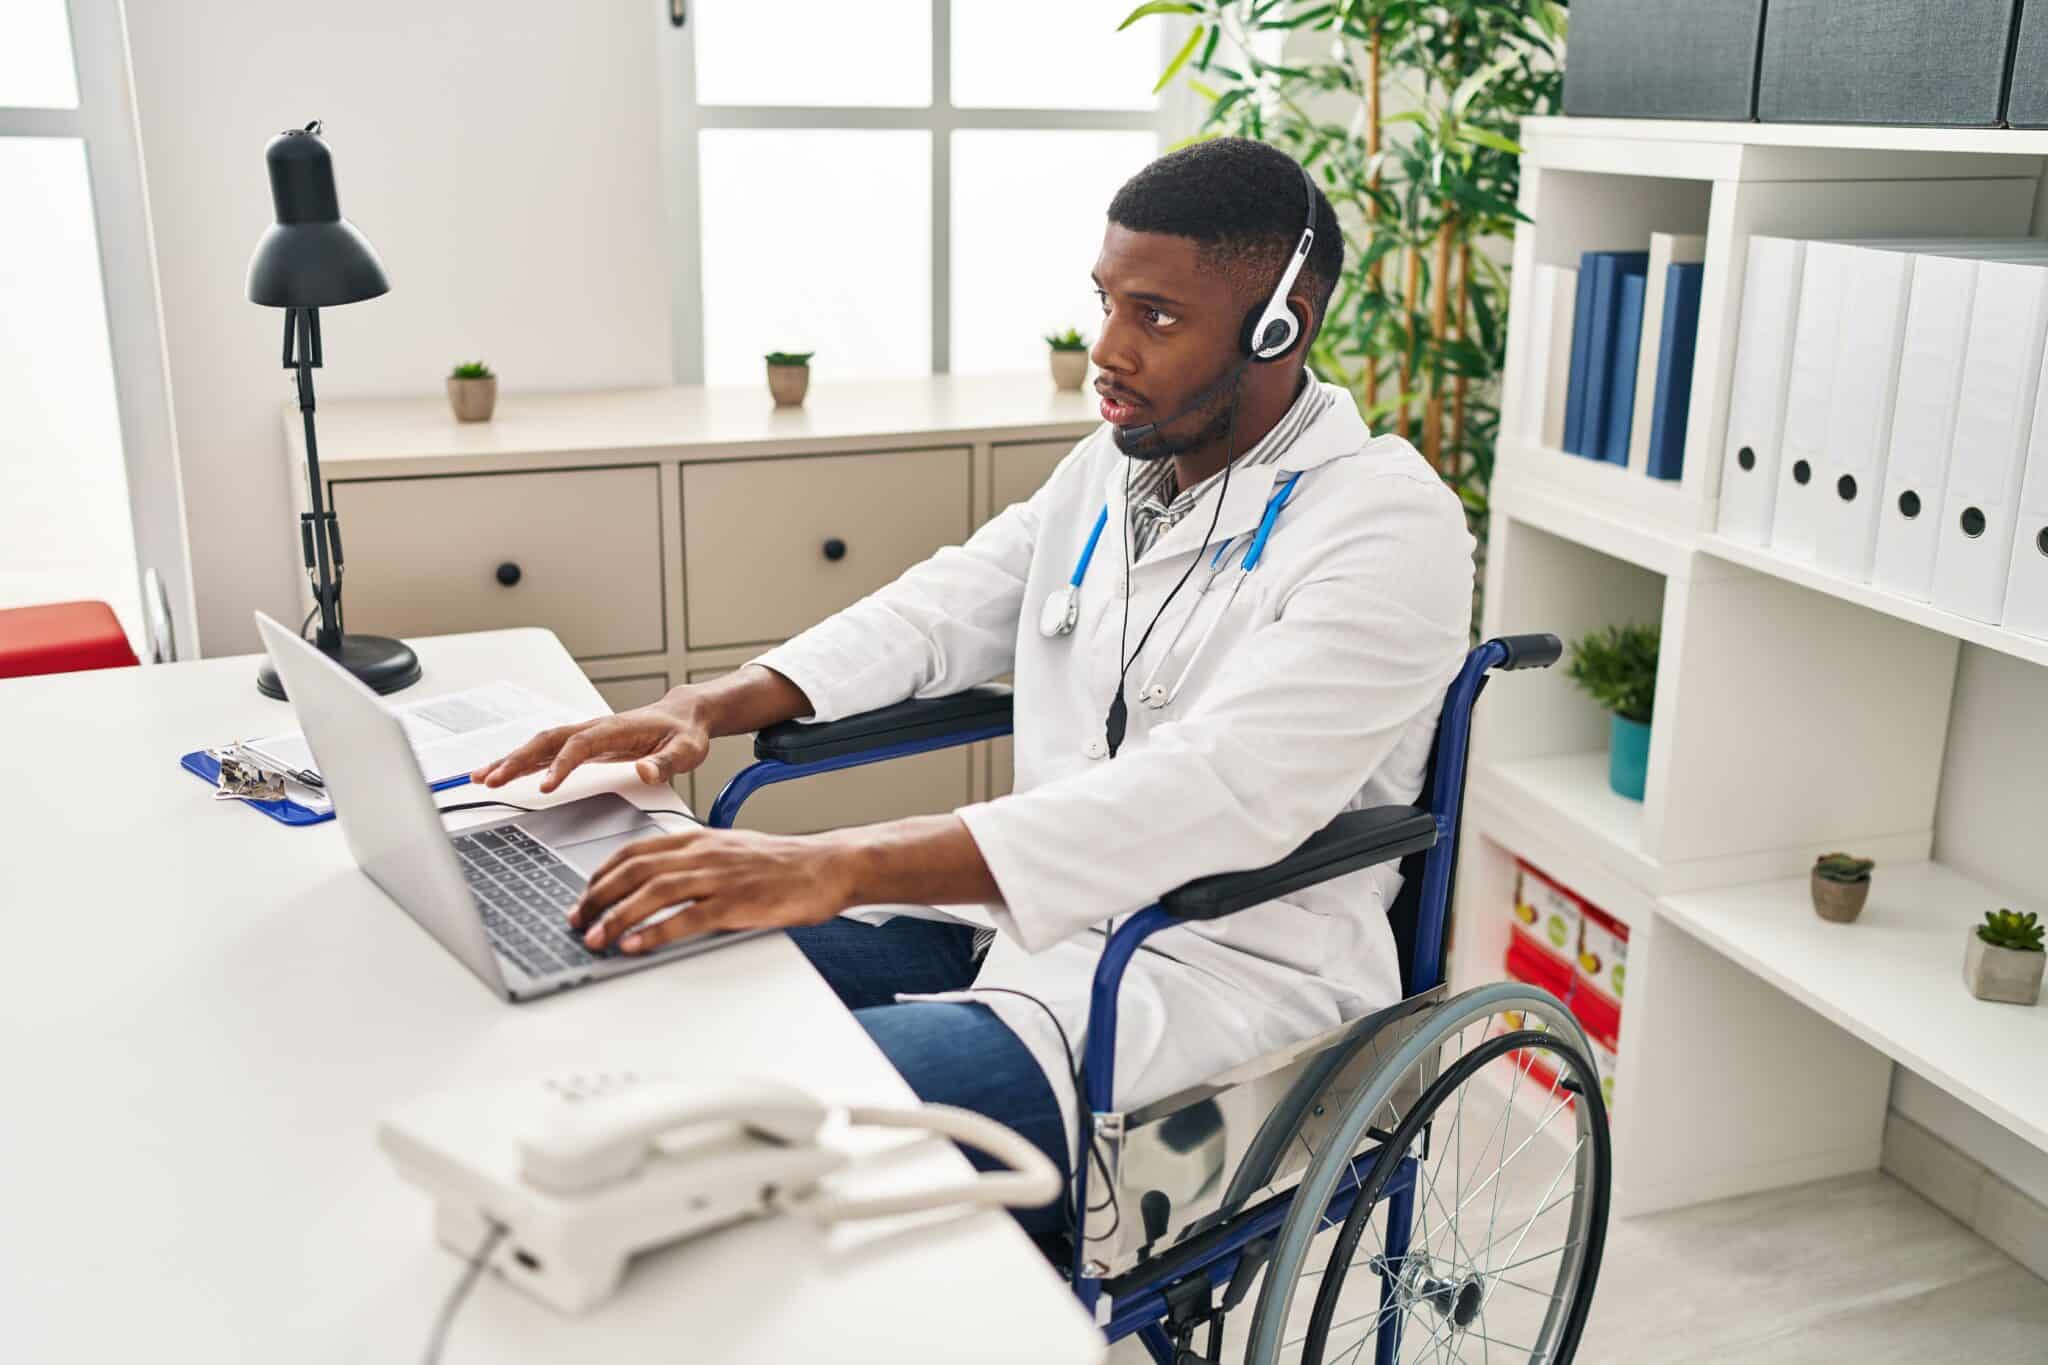 Learn how virtual medical scribes can help physicians with disabilities overcome physical and cognitive challenges. AxiScribe promotes healthcare accessibility.